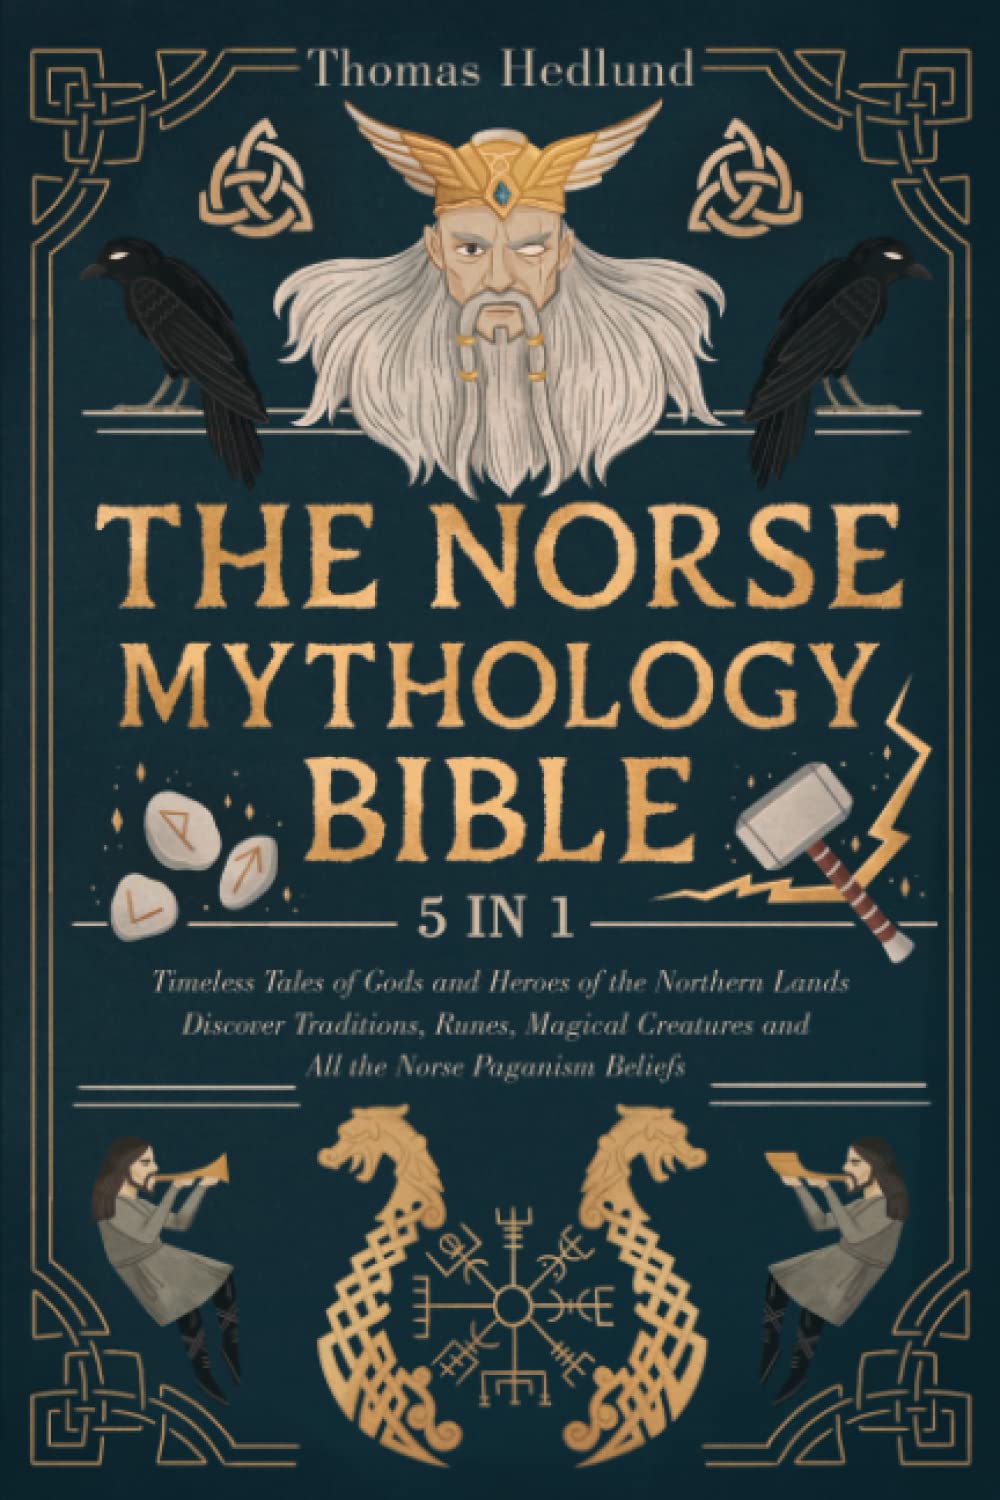 The Norse Mythology Bible: [5 IN 1] Timeless Tales of Gods and Heroes of the Northern Lands | Discover Traditions, Runes, Magical Creatures and All the Norse Paganism Beliefs